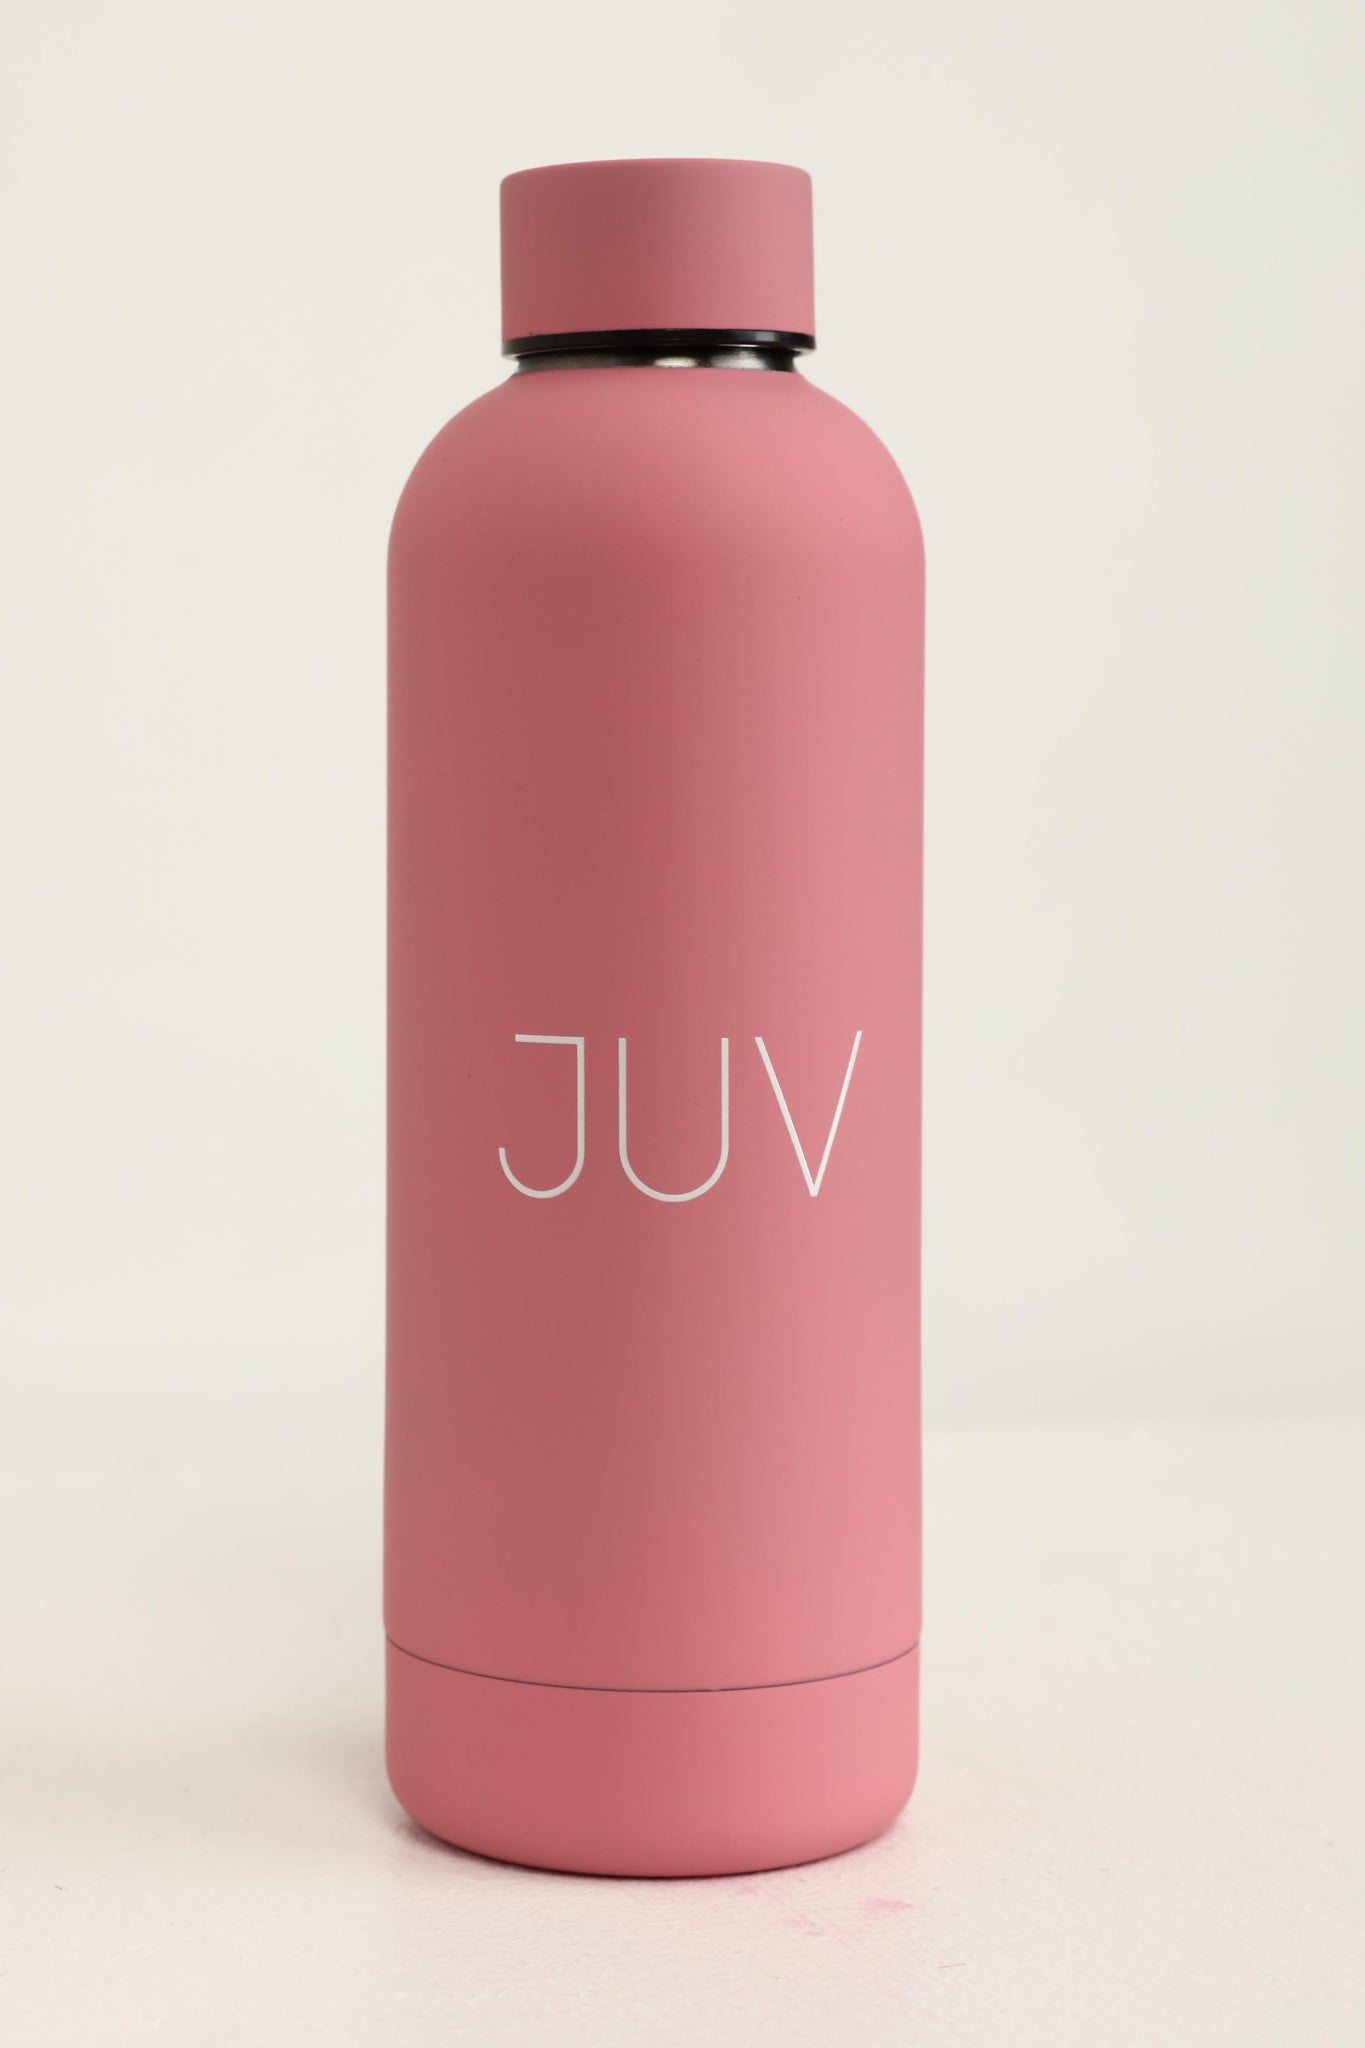 JUV mia thermal bottle in pink, front view.